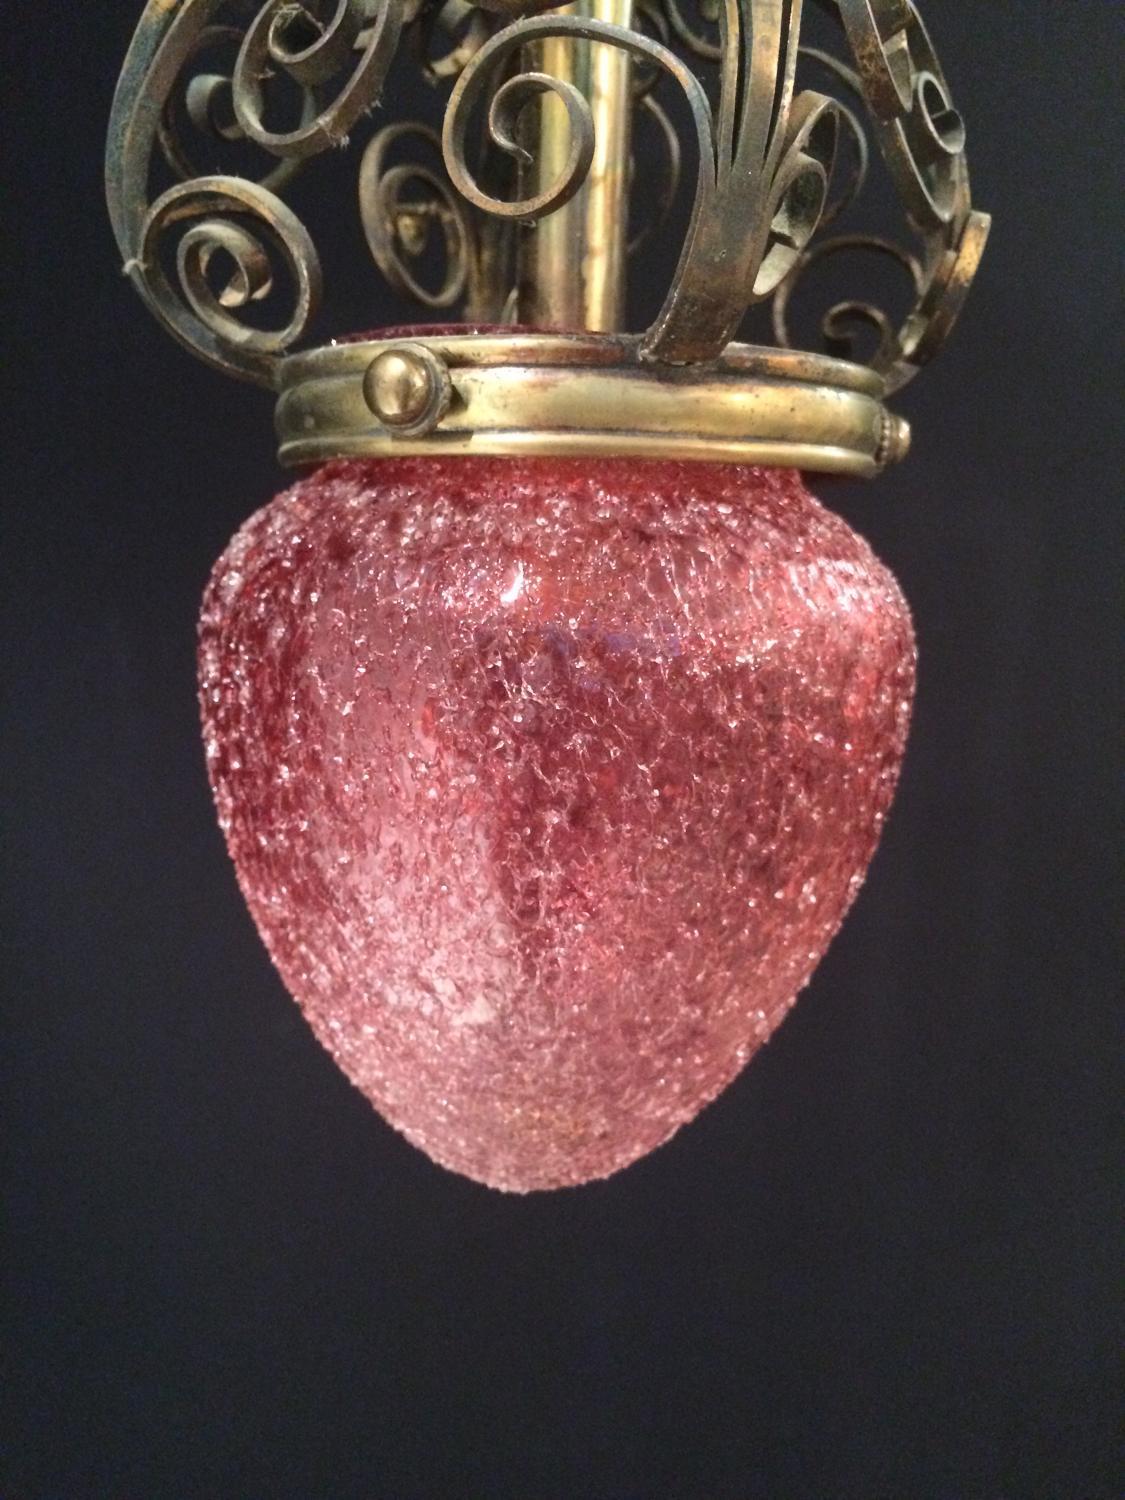 Faraday & Son light, the shade with applied drizzled cranberry glass in the form of a strawberry, circa 1900. The crown of hand wrought brasswork. English, 20th century.

The frame is register marked as Faraday & Son. Robert Faraday had a foundry